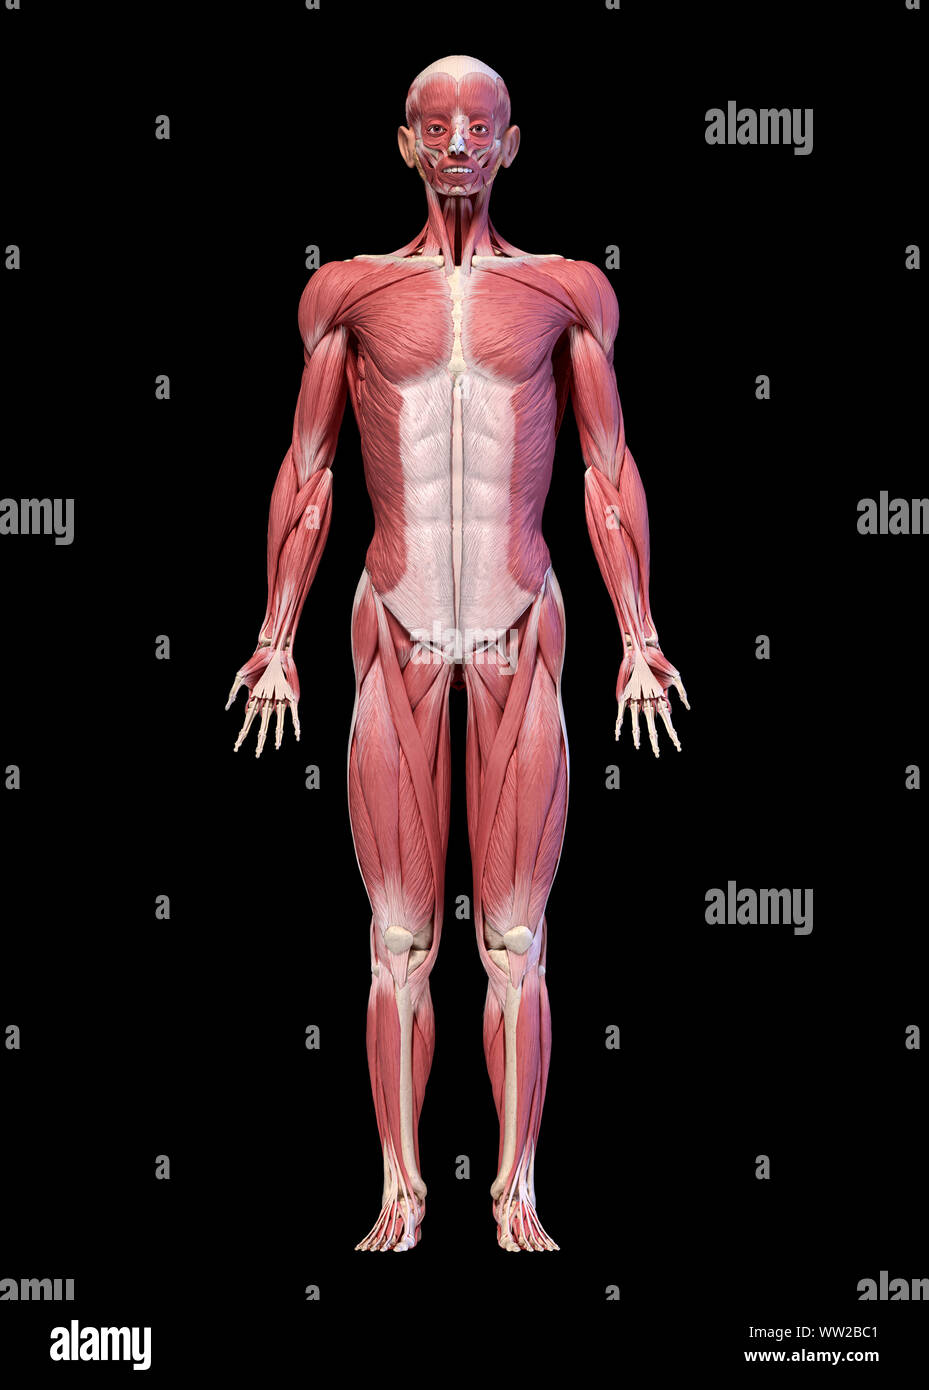 Human anatomy 3d illustration, male muscular system full body, frontal view. On black background. Stock Photo